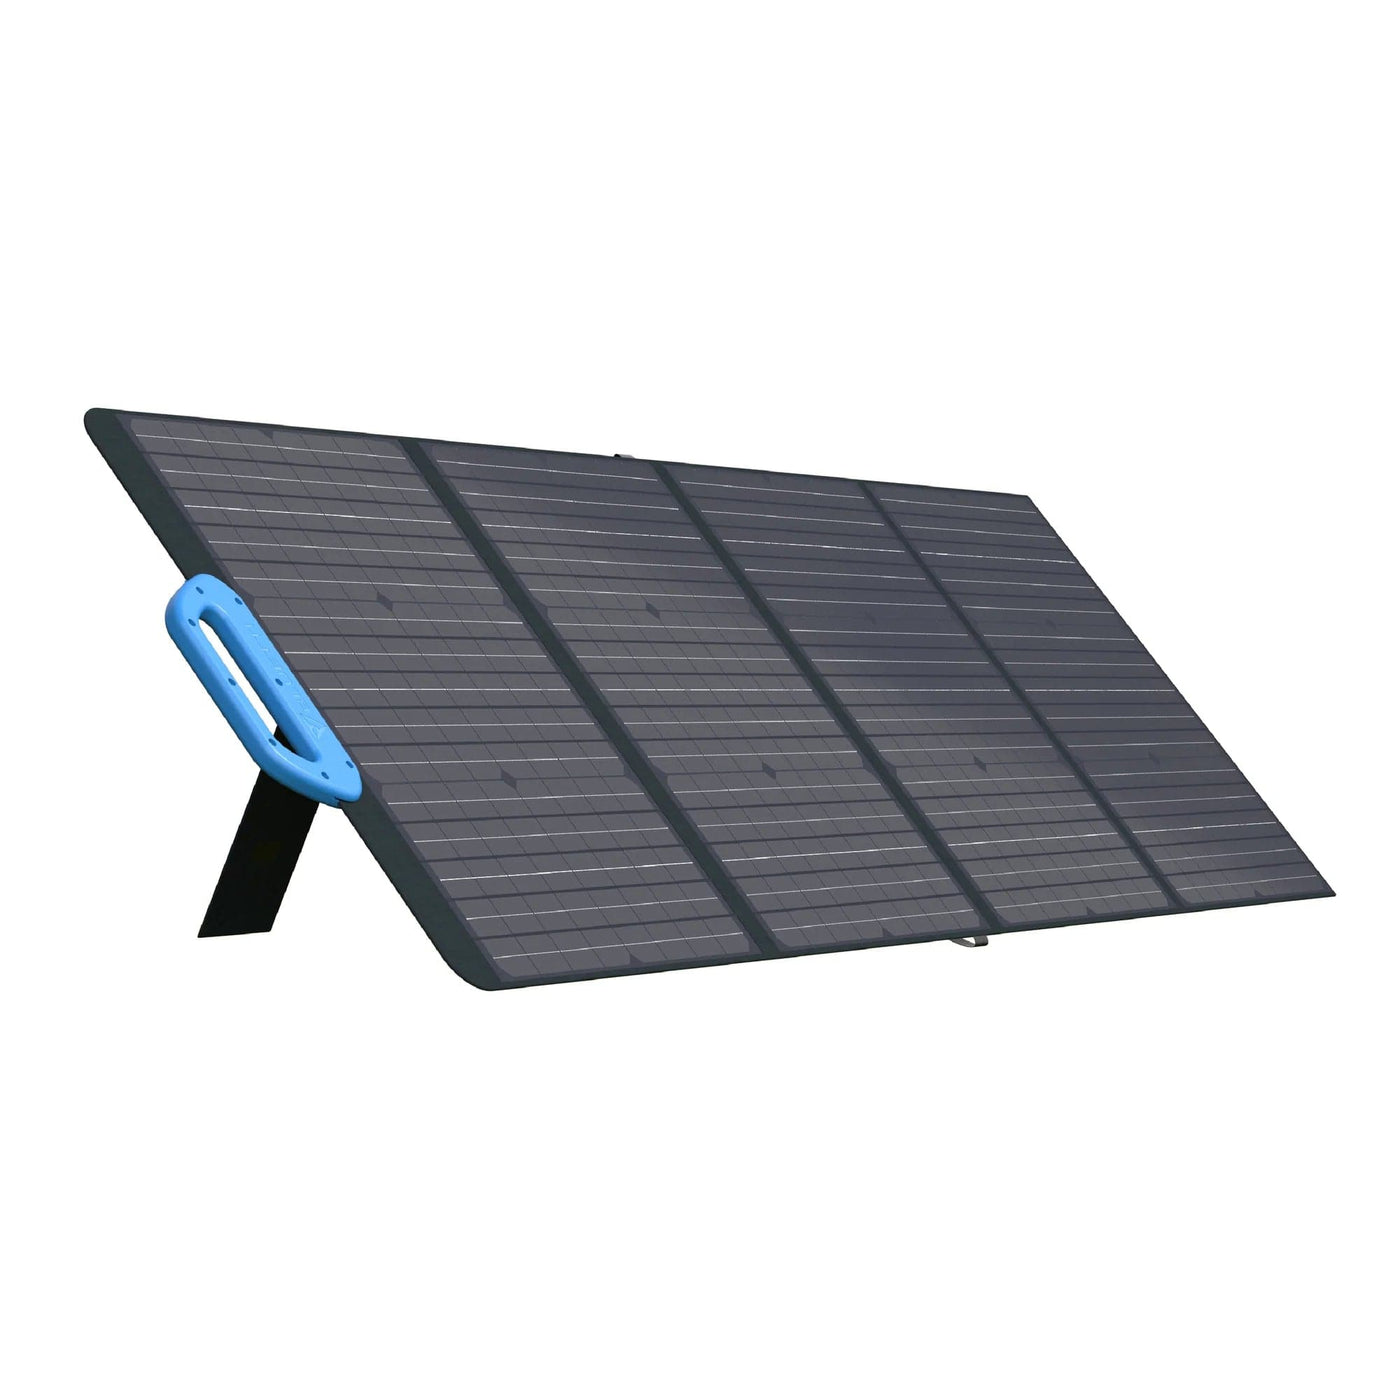 120 Watt Portable Solar Panel: Bluetti PV120 - Front Left View Fully Expanded